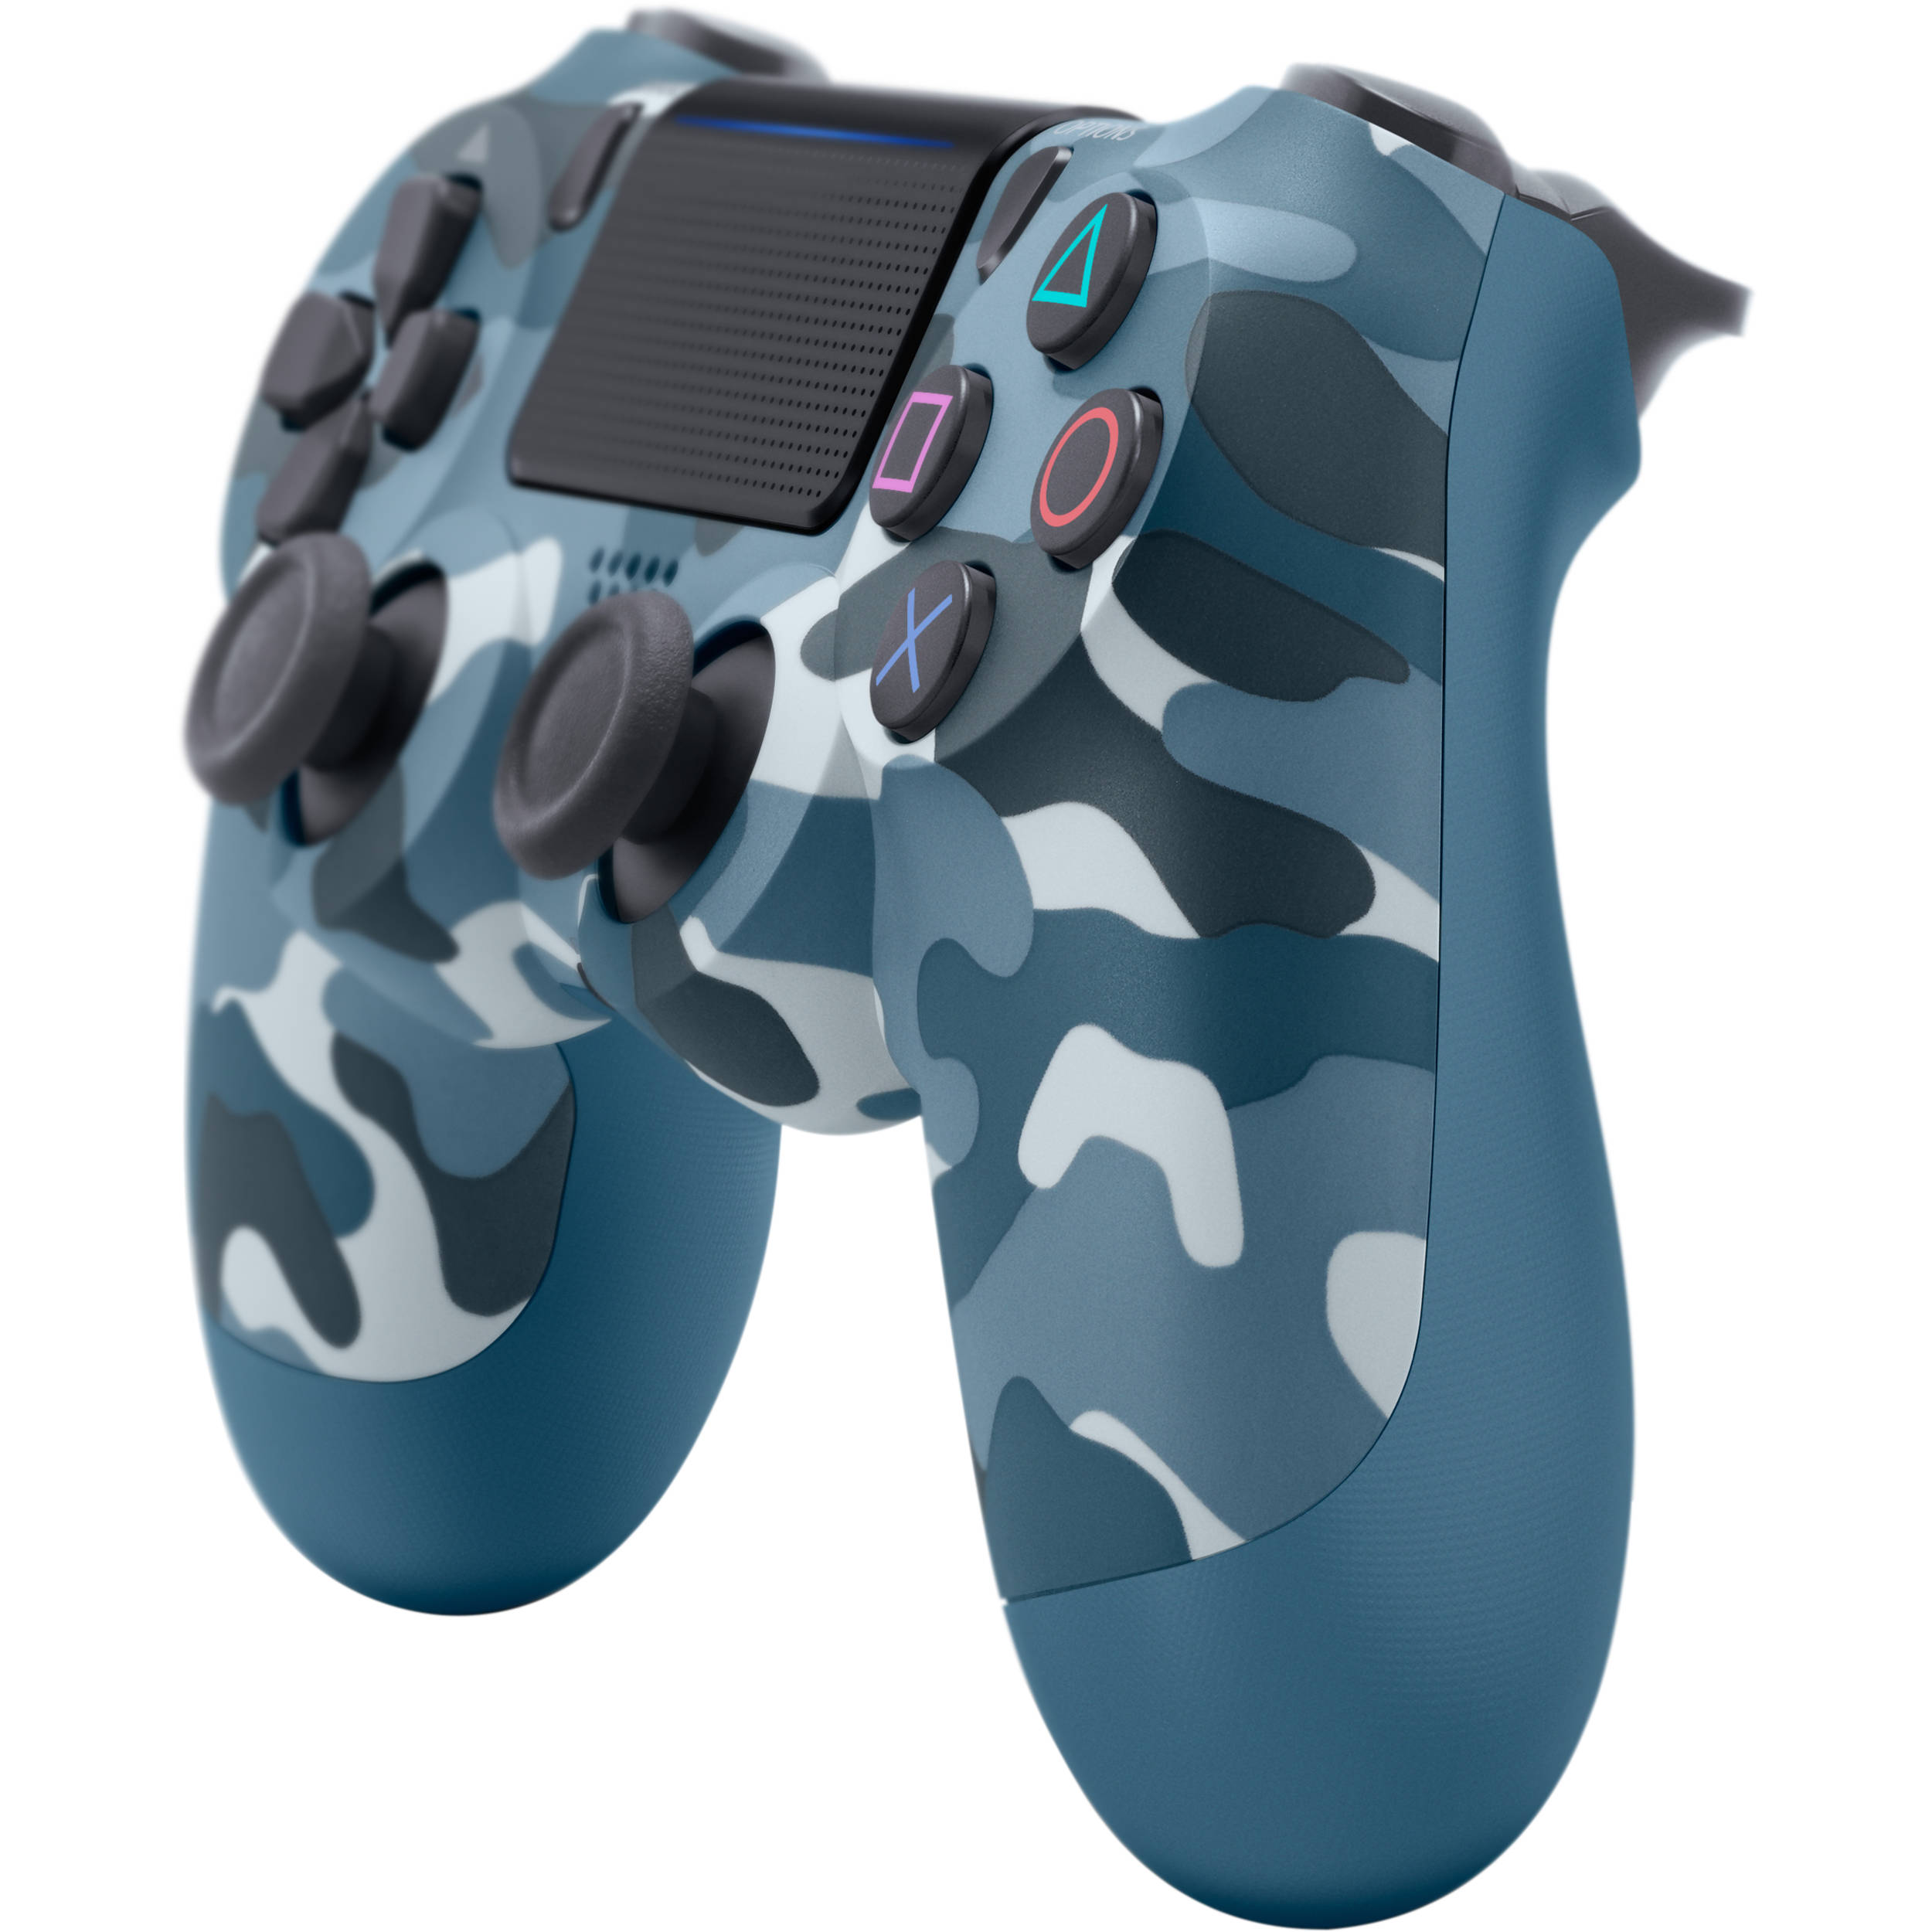 DualShock 4 Wireless Controller for PlayStation 4 Camo Blue